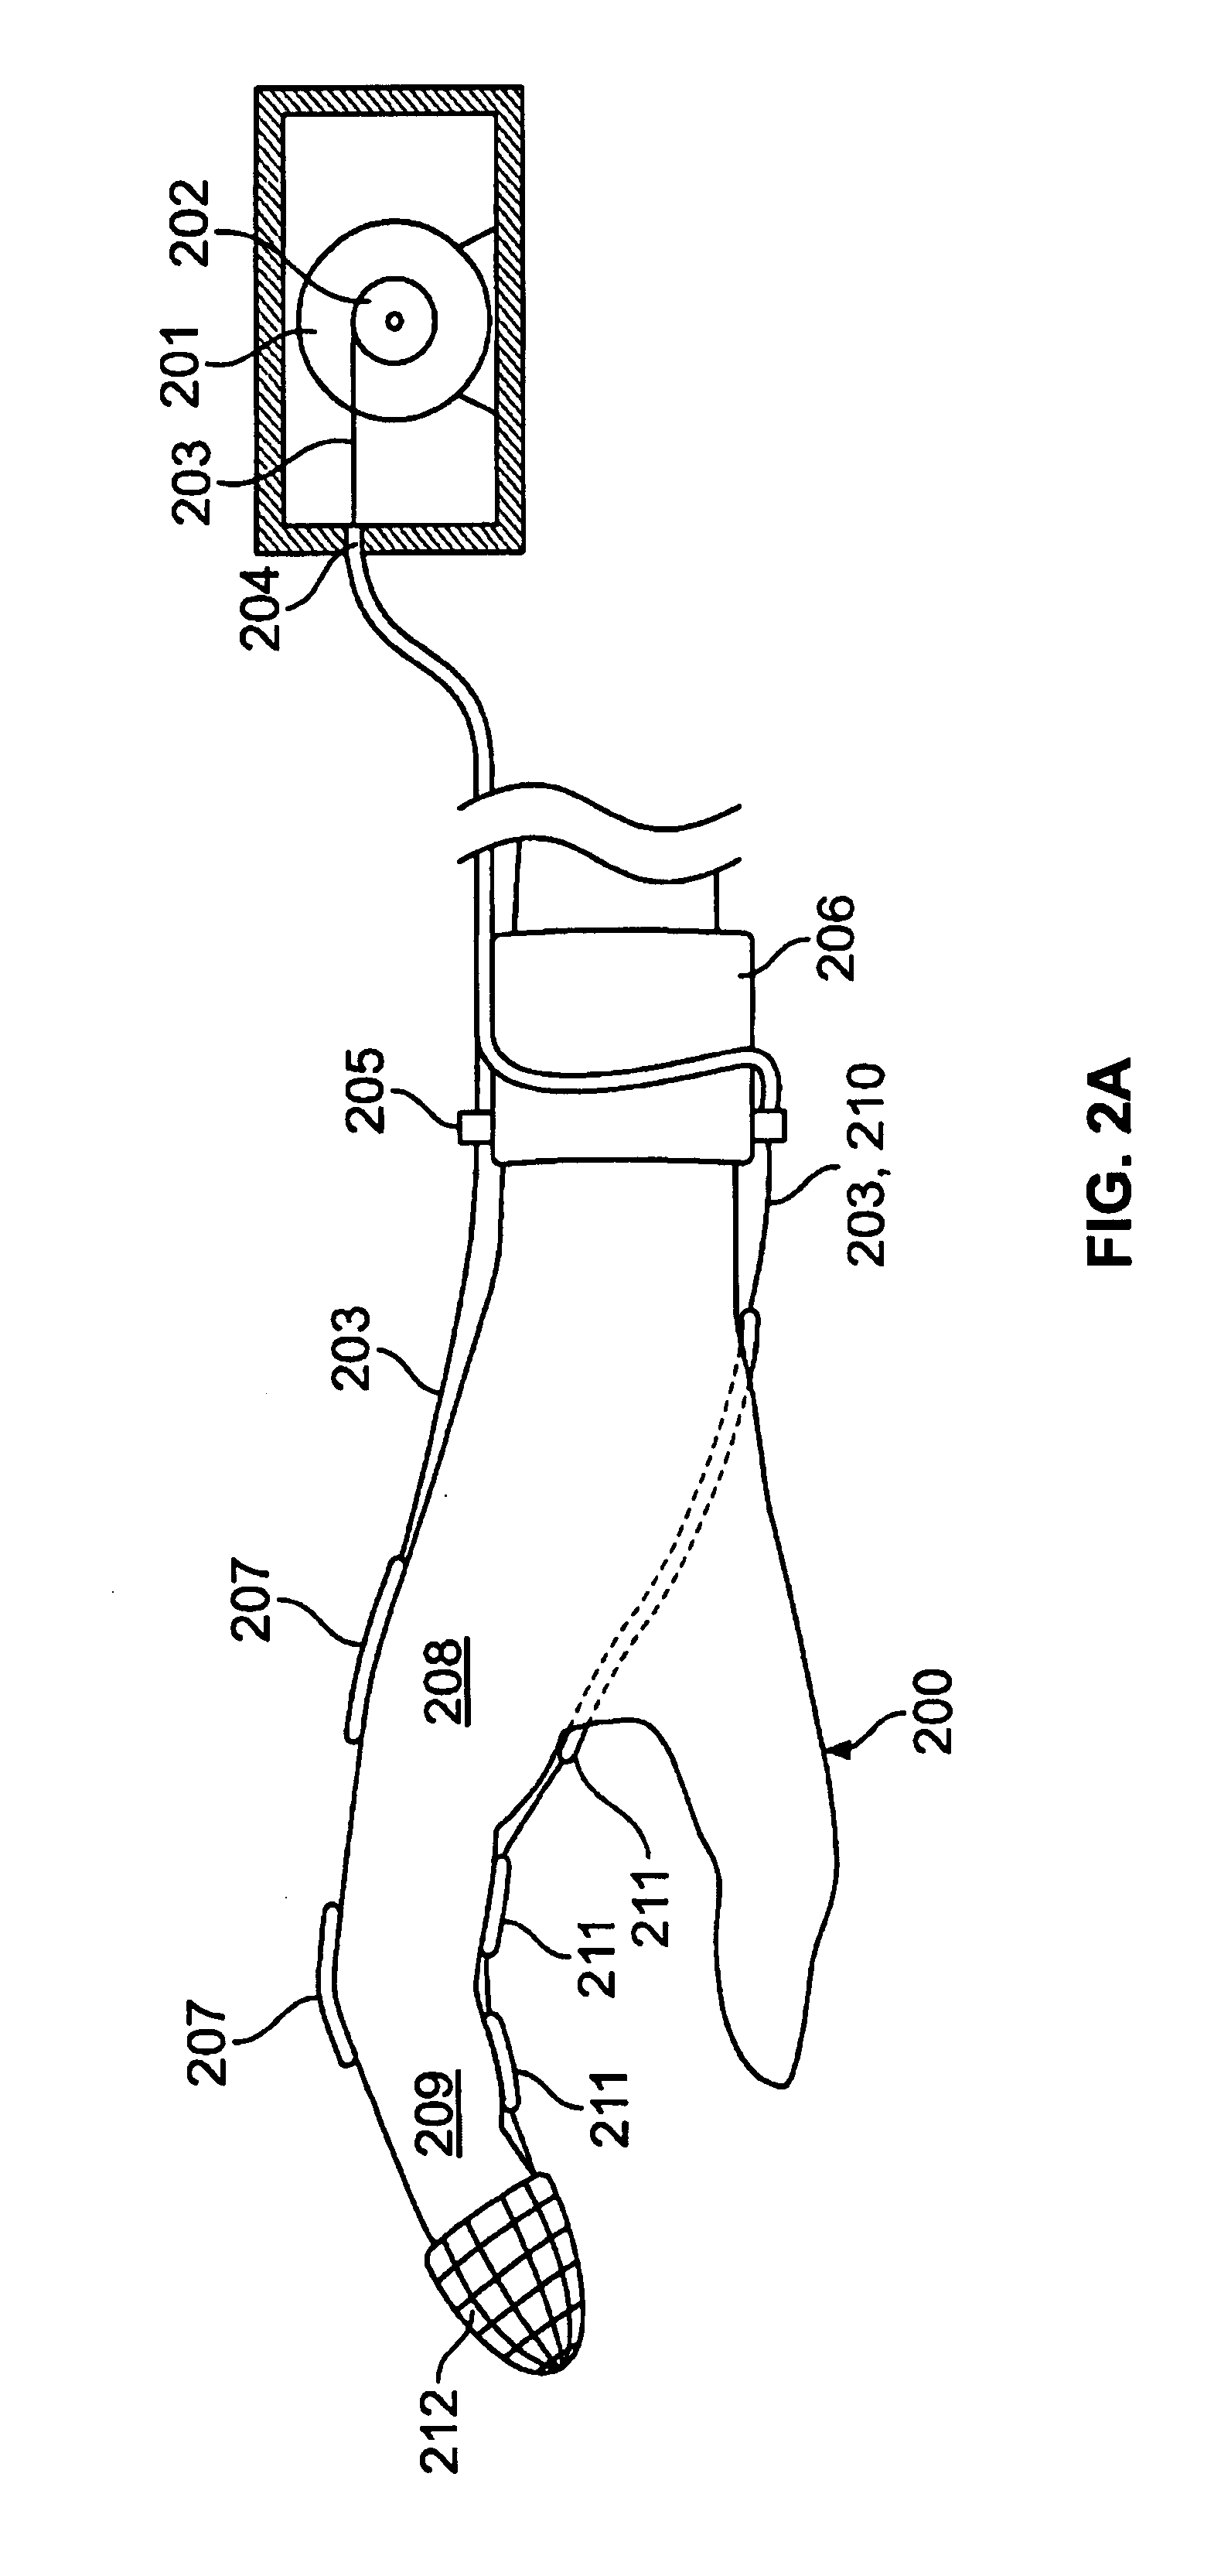 Force feedback and texture simulating interface device